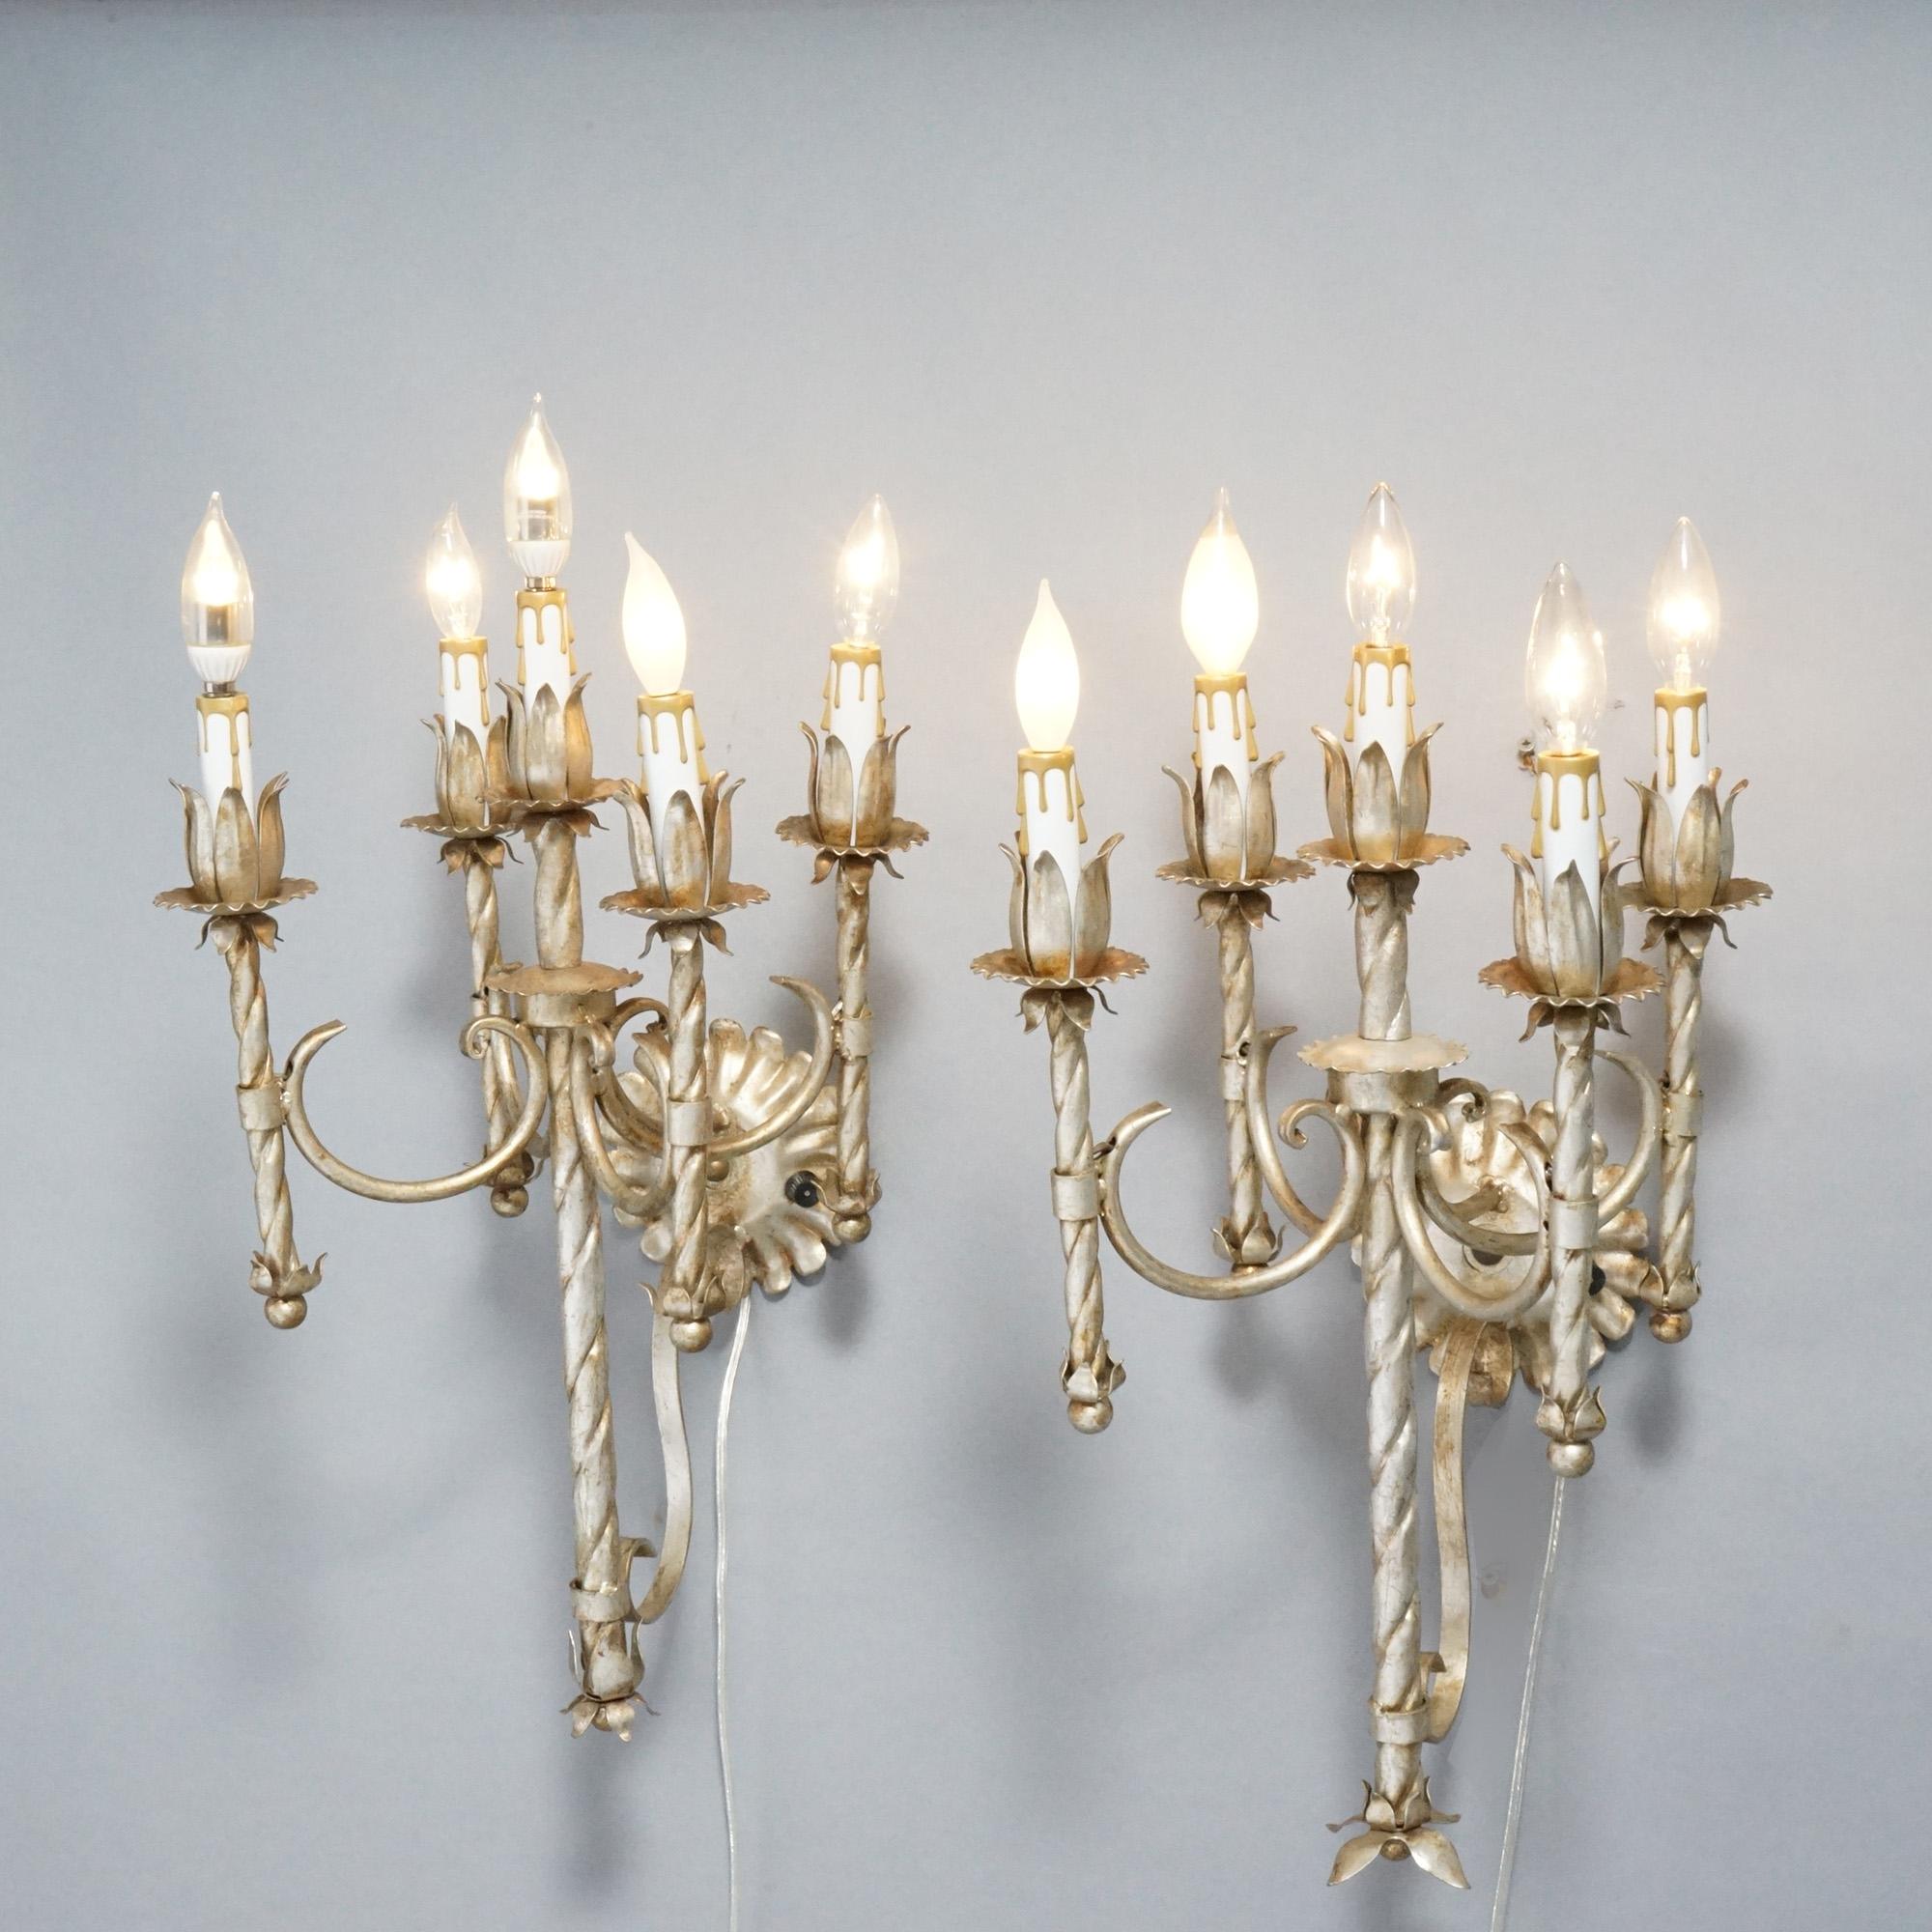 Antique Arts & Crafts Gothic Silvered Finish Candelabra Wall Sconces 20th C. In Good Condition For Sale In Big Flats, NY